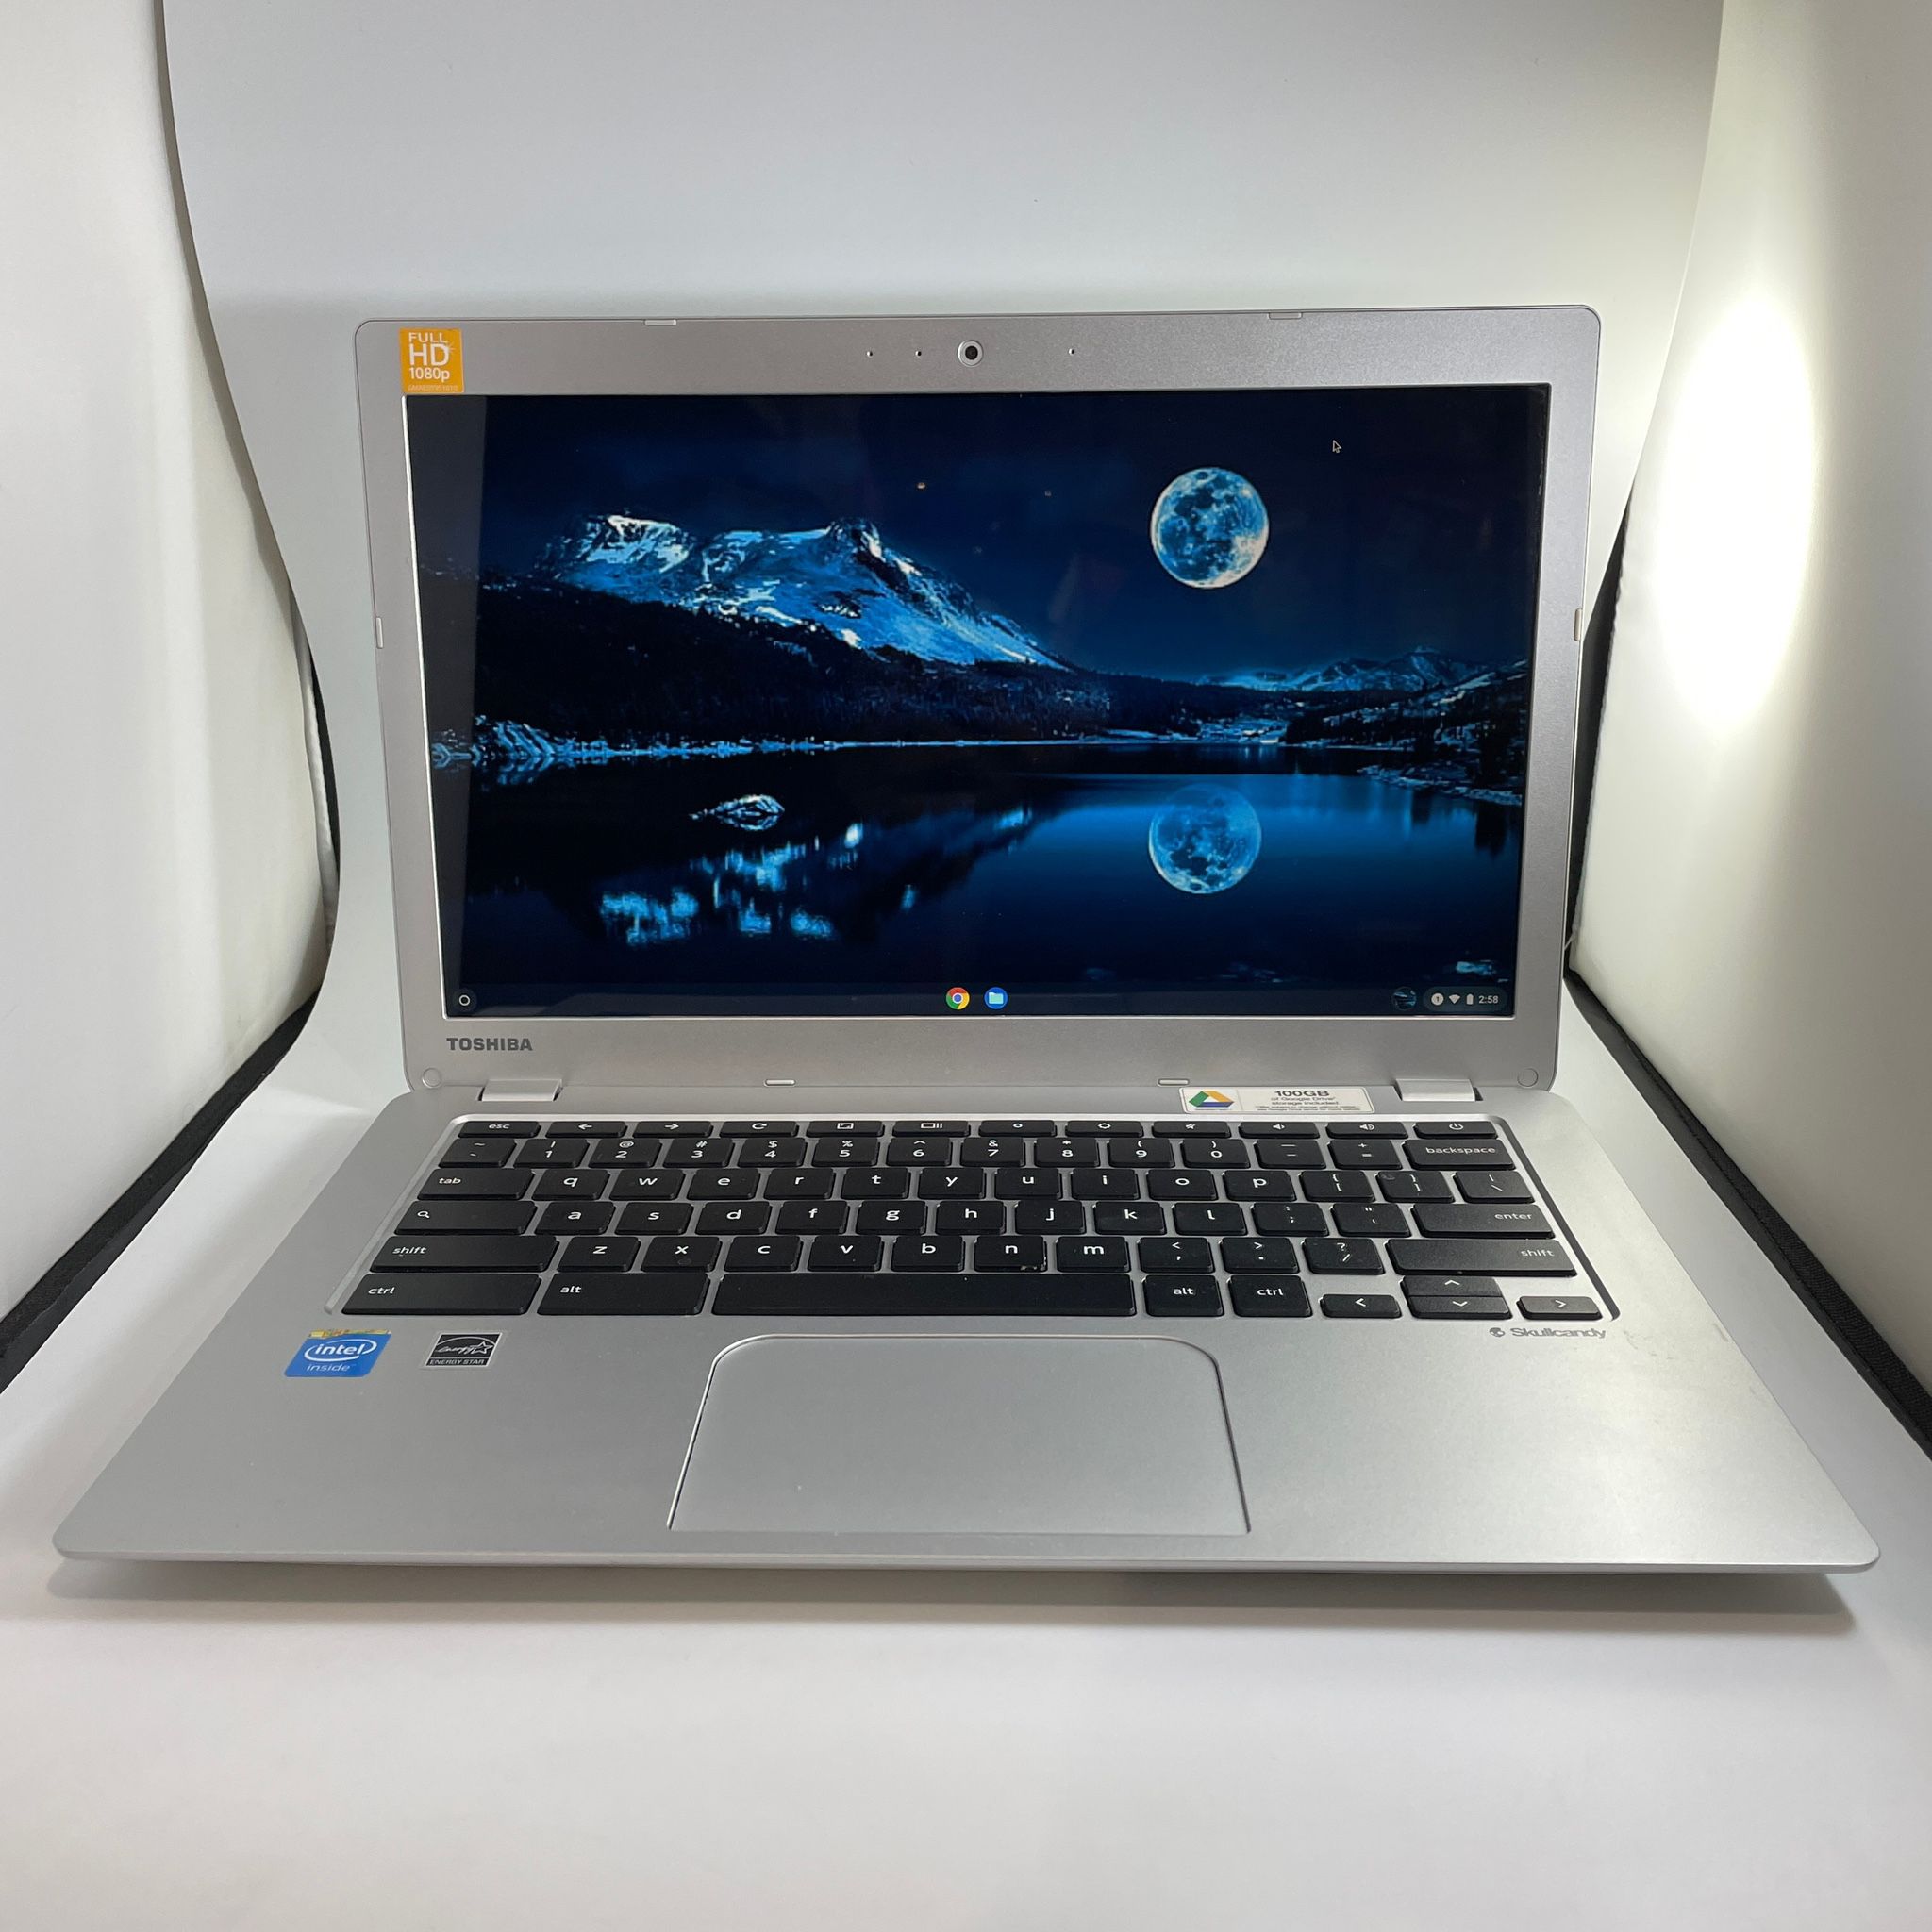 TOSHIBA ChromeBook 13” -Fully Functional $75 Good for Streaming